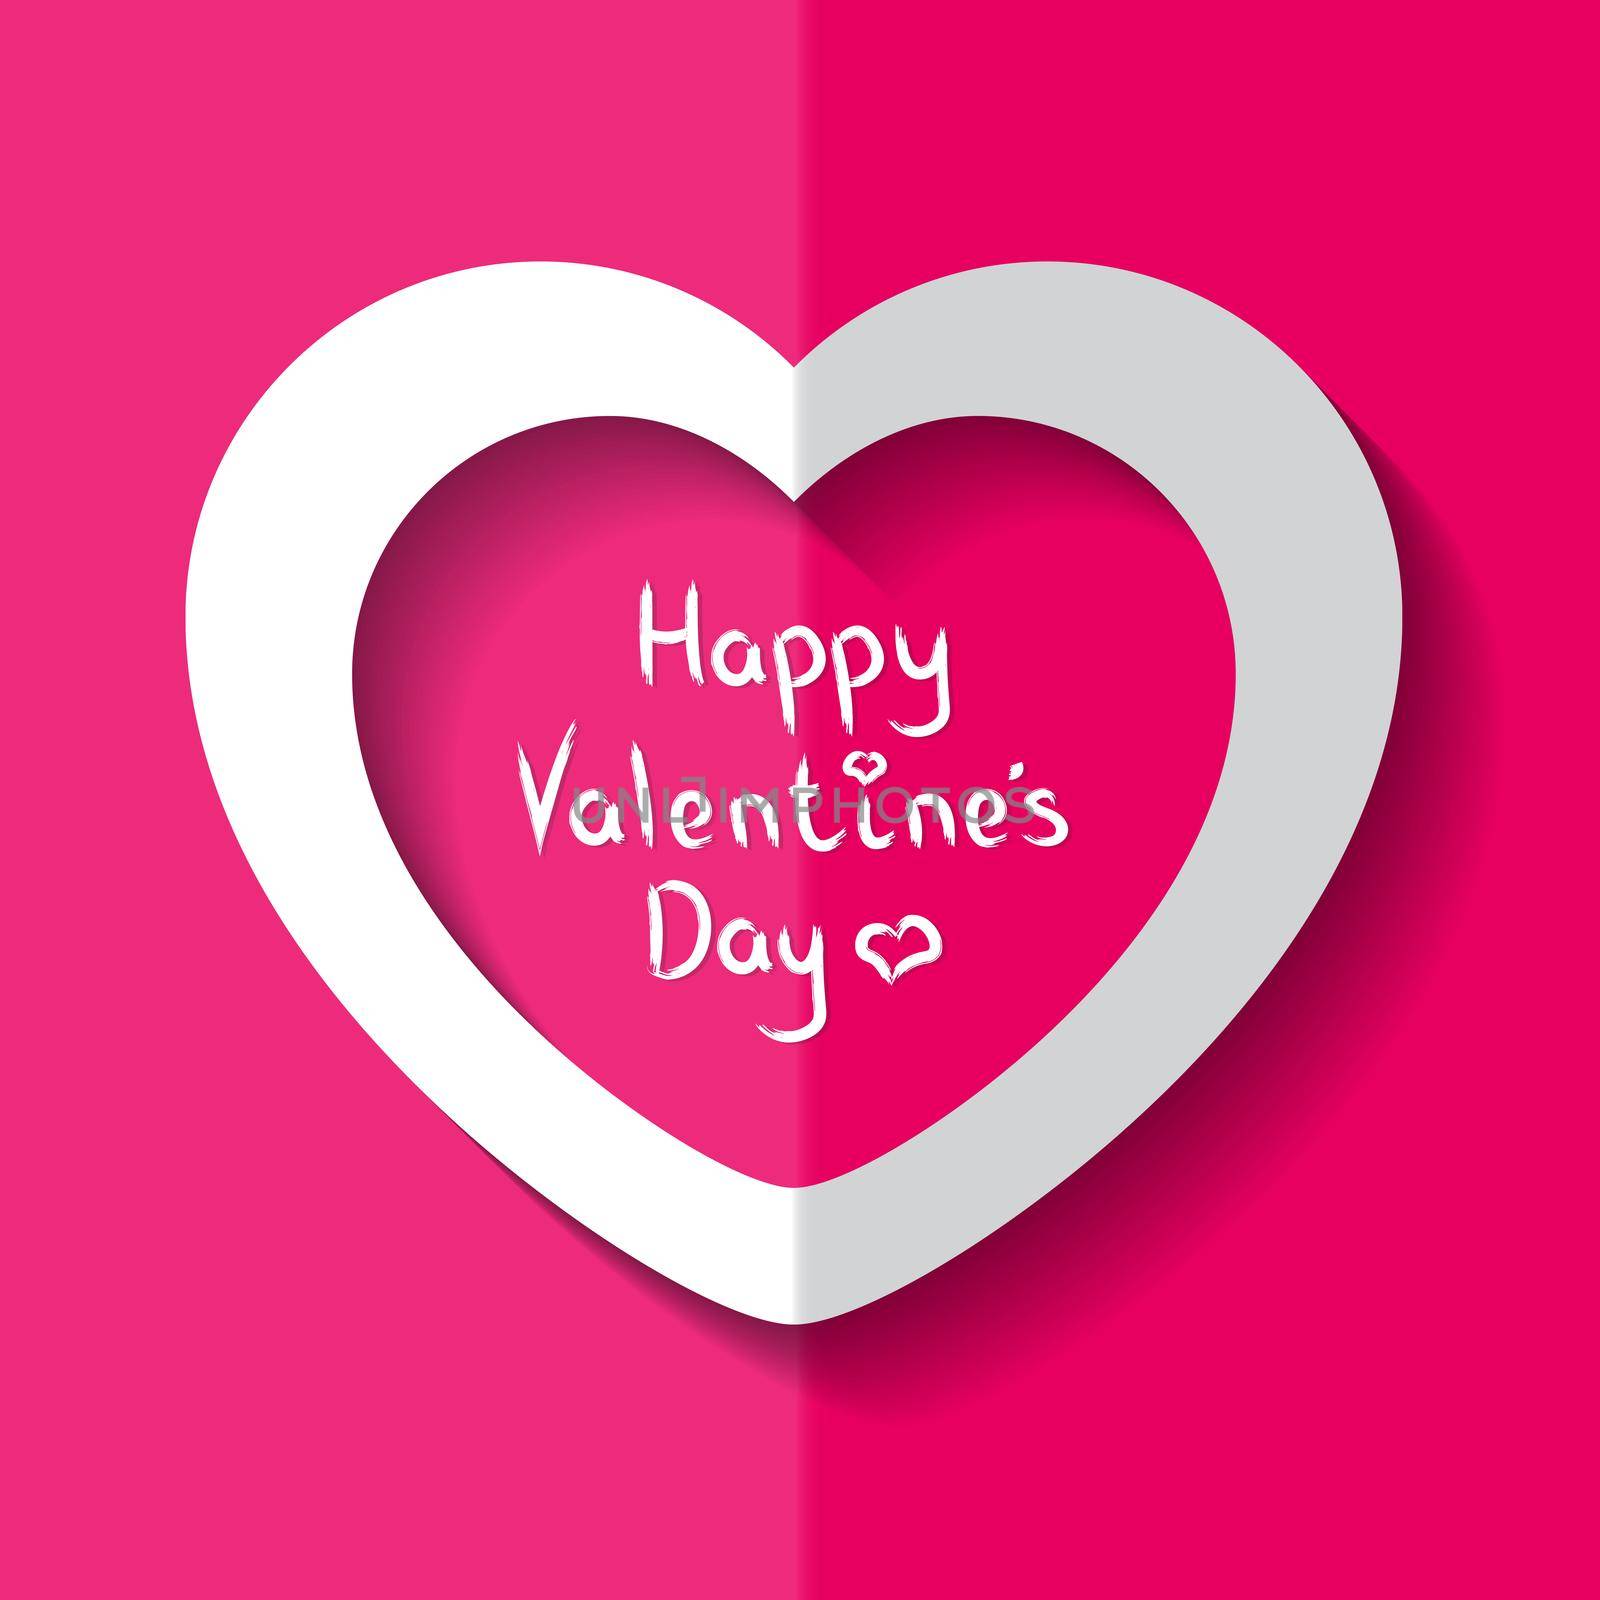 illustration of Heart for Valentine s Day on pink background.